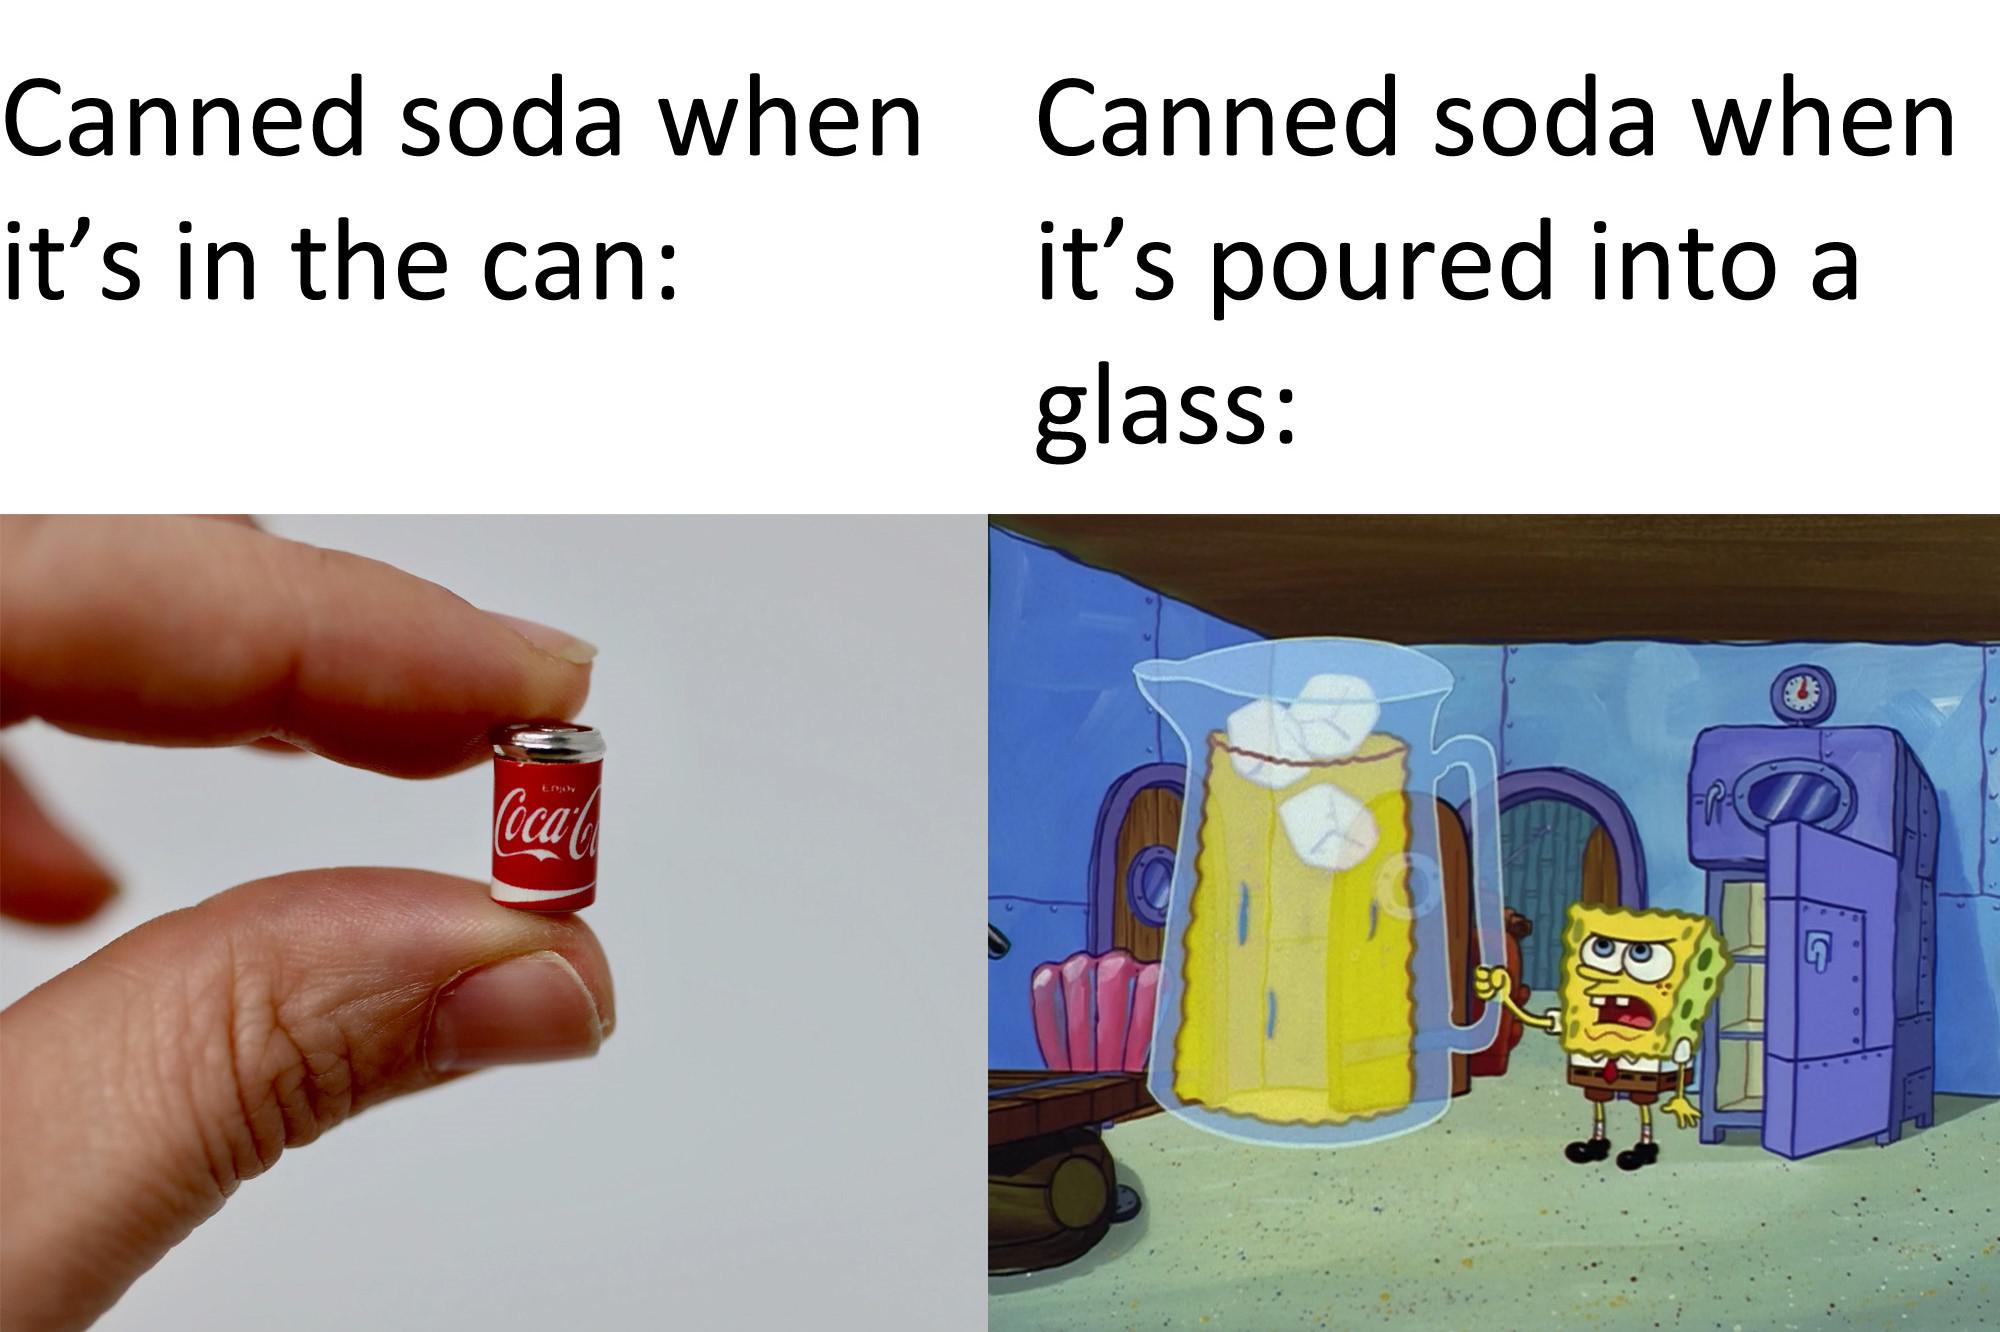 monday morning randomness - spongebob big drink - Canned soda when it's in the can CocaCo Canned soda when it's poured into a glass Boh